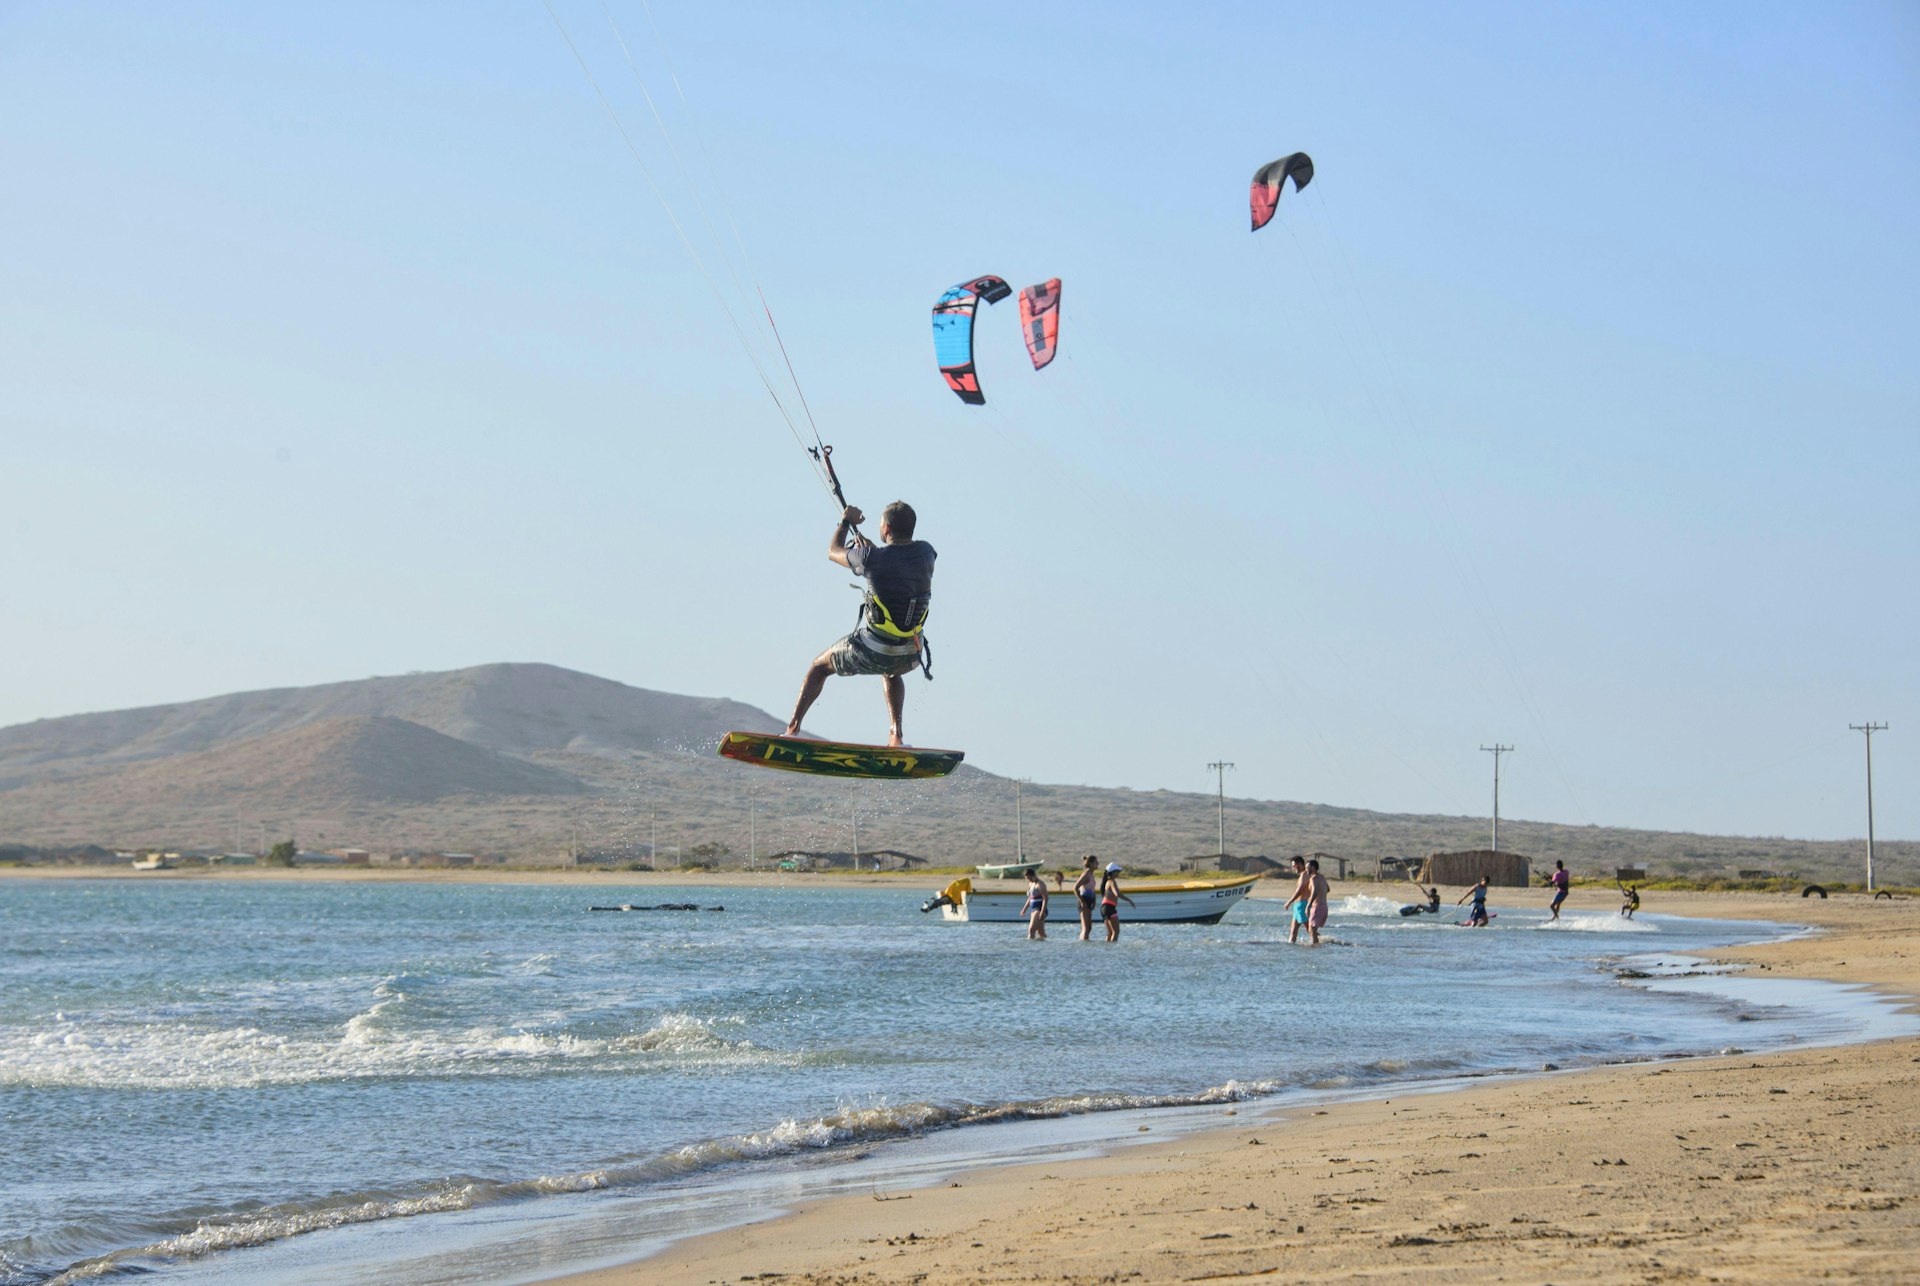 A kitesurfer on a board is lifted up above the sand and out to sea